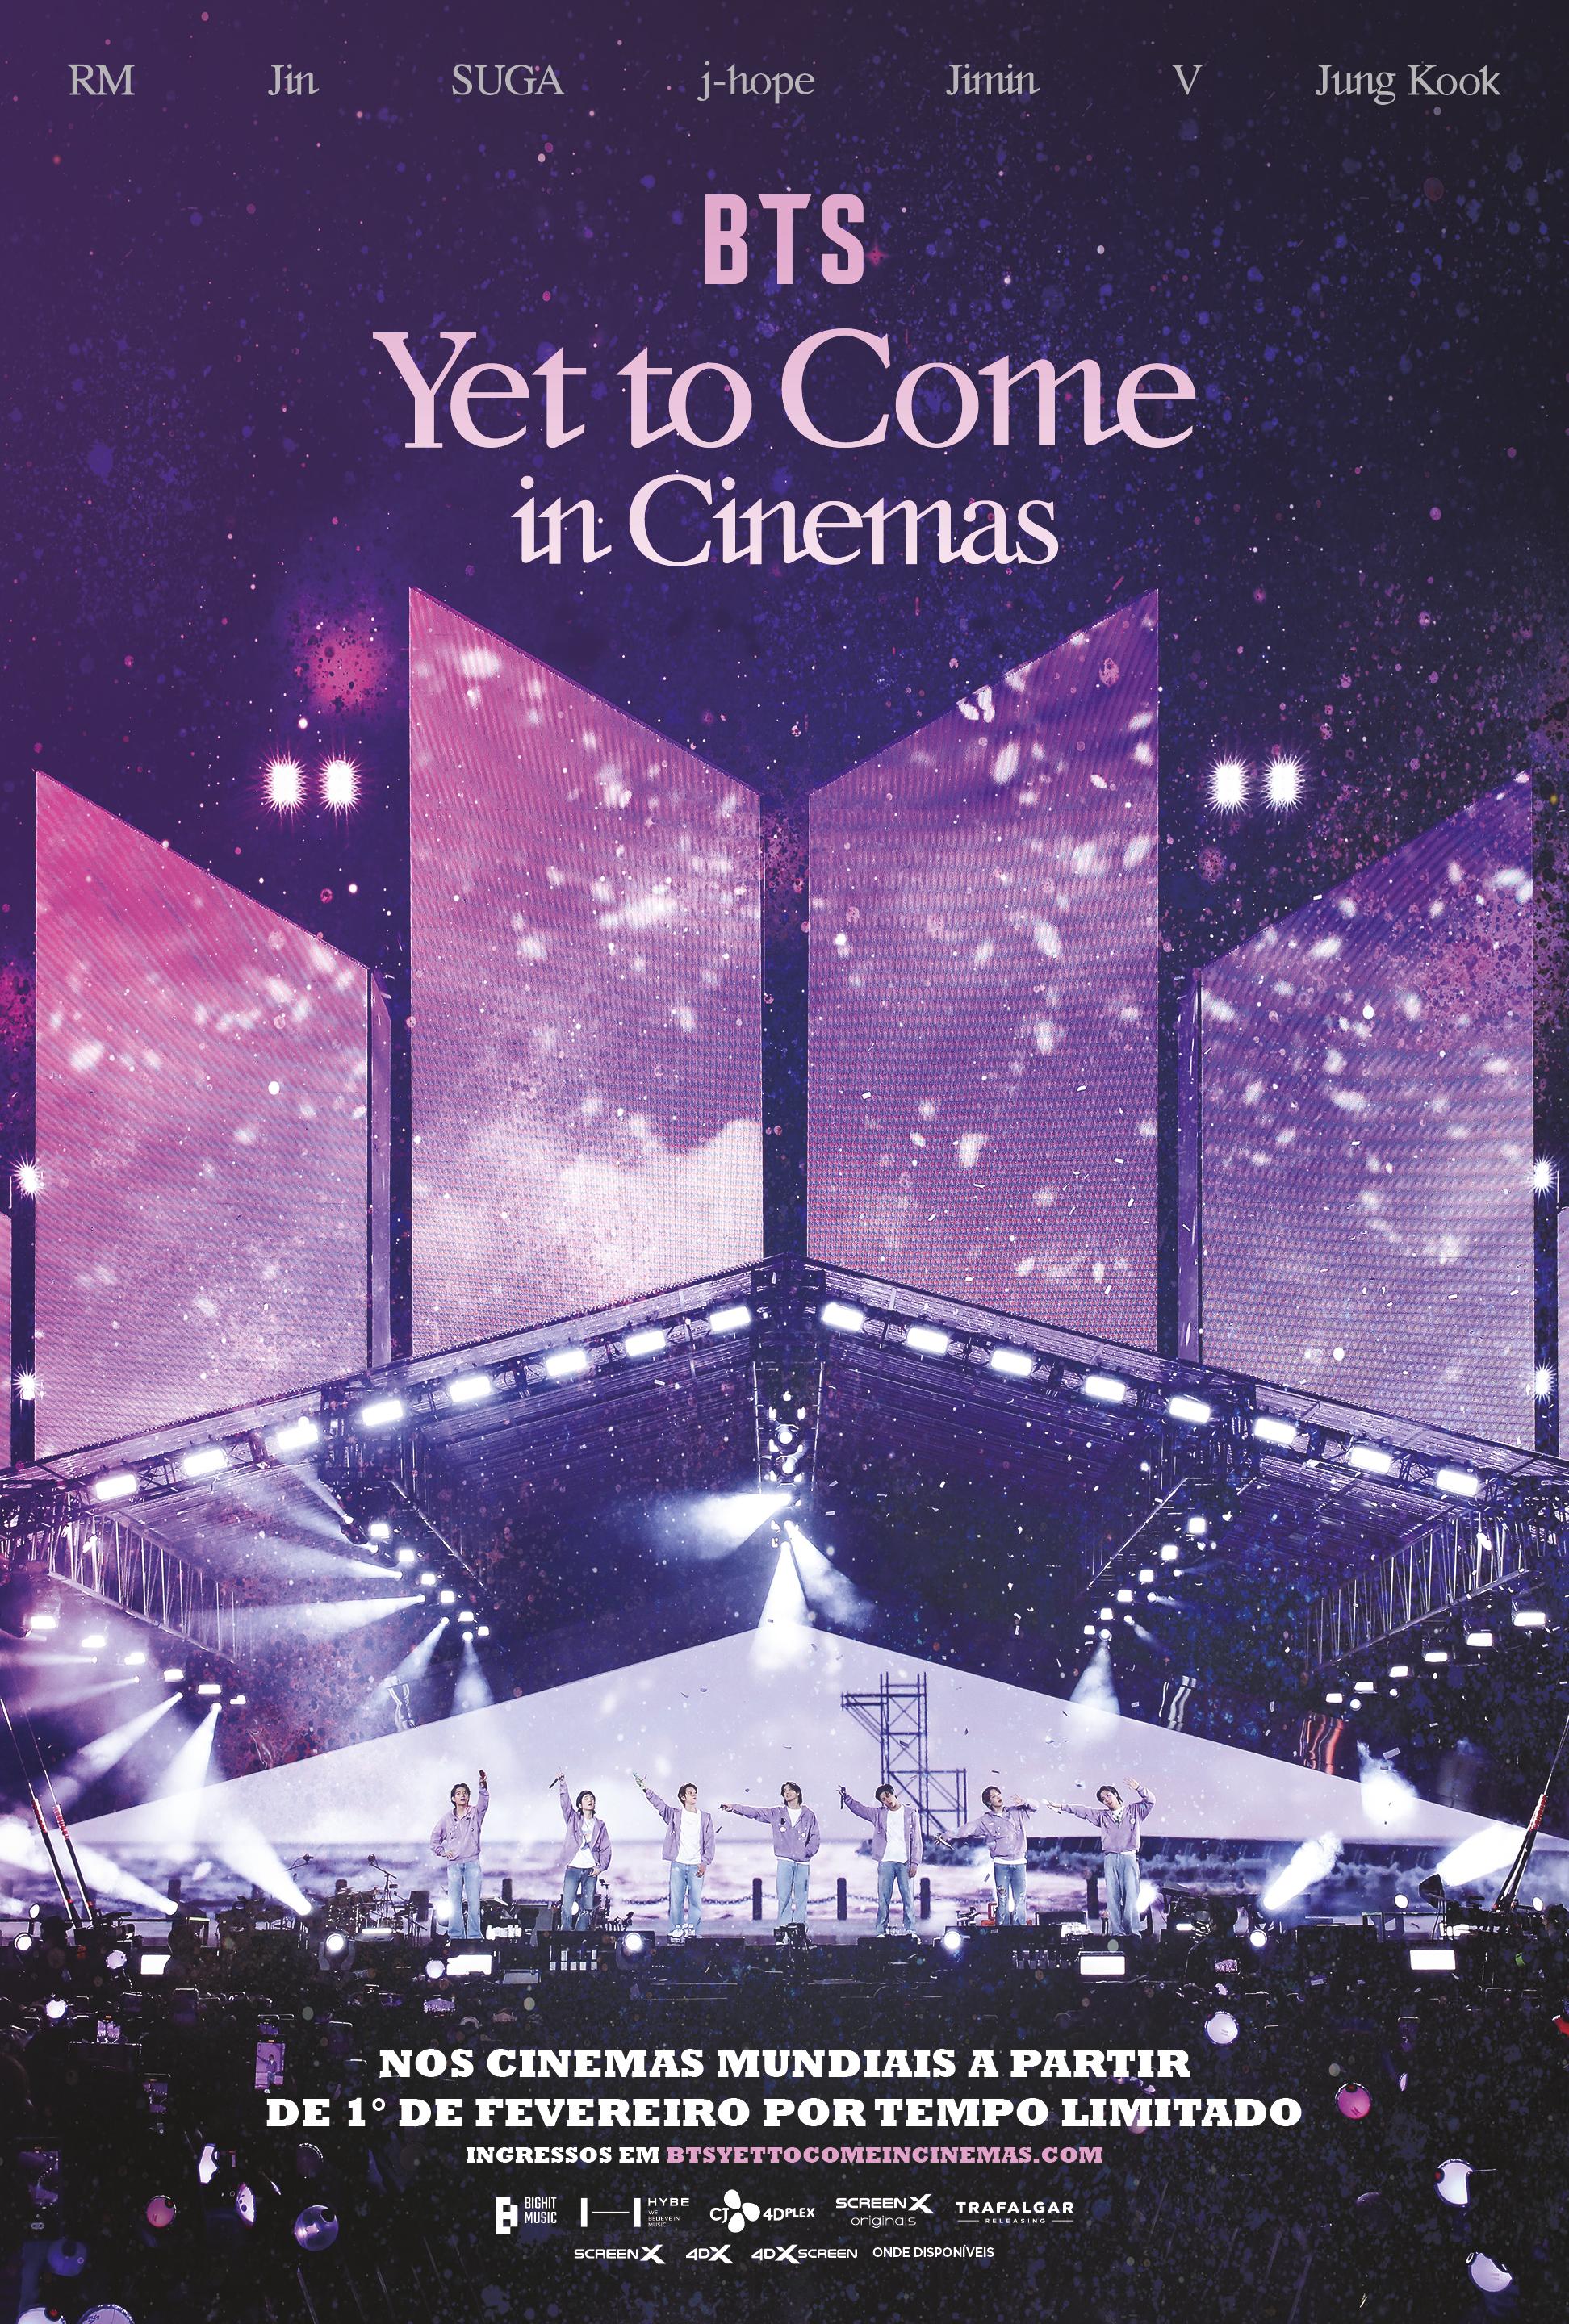 The film sees BTS perform 19 of their hit tracks, including 'Dynamite', 'Butter', 'Run', 'MIC Drop' and the title track, 'Yet To Come'. It was released on the big screen across the world, including India, earlier this year on February 1.